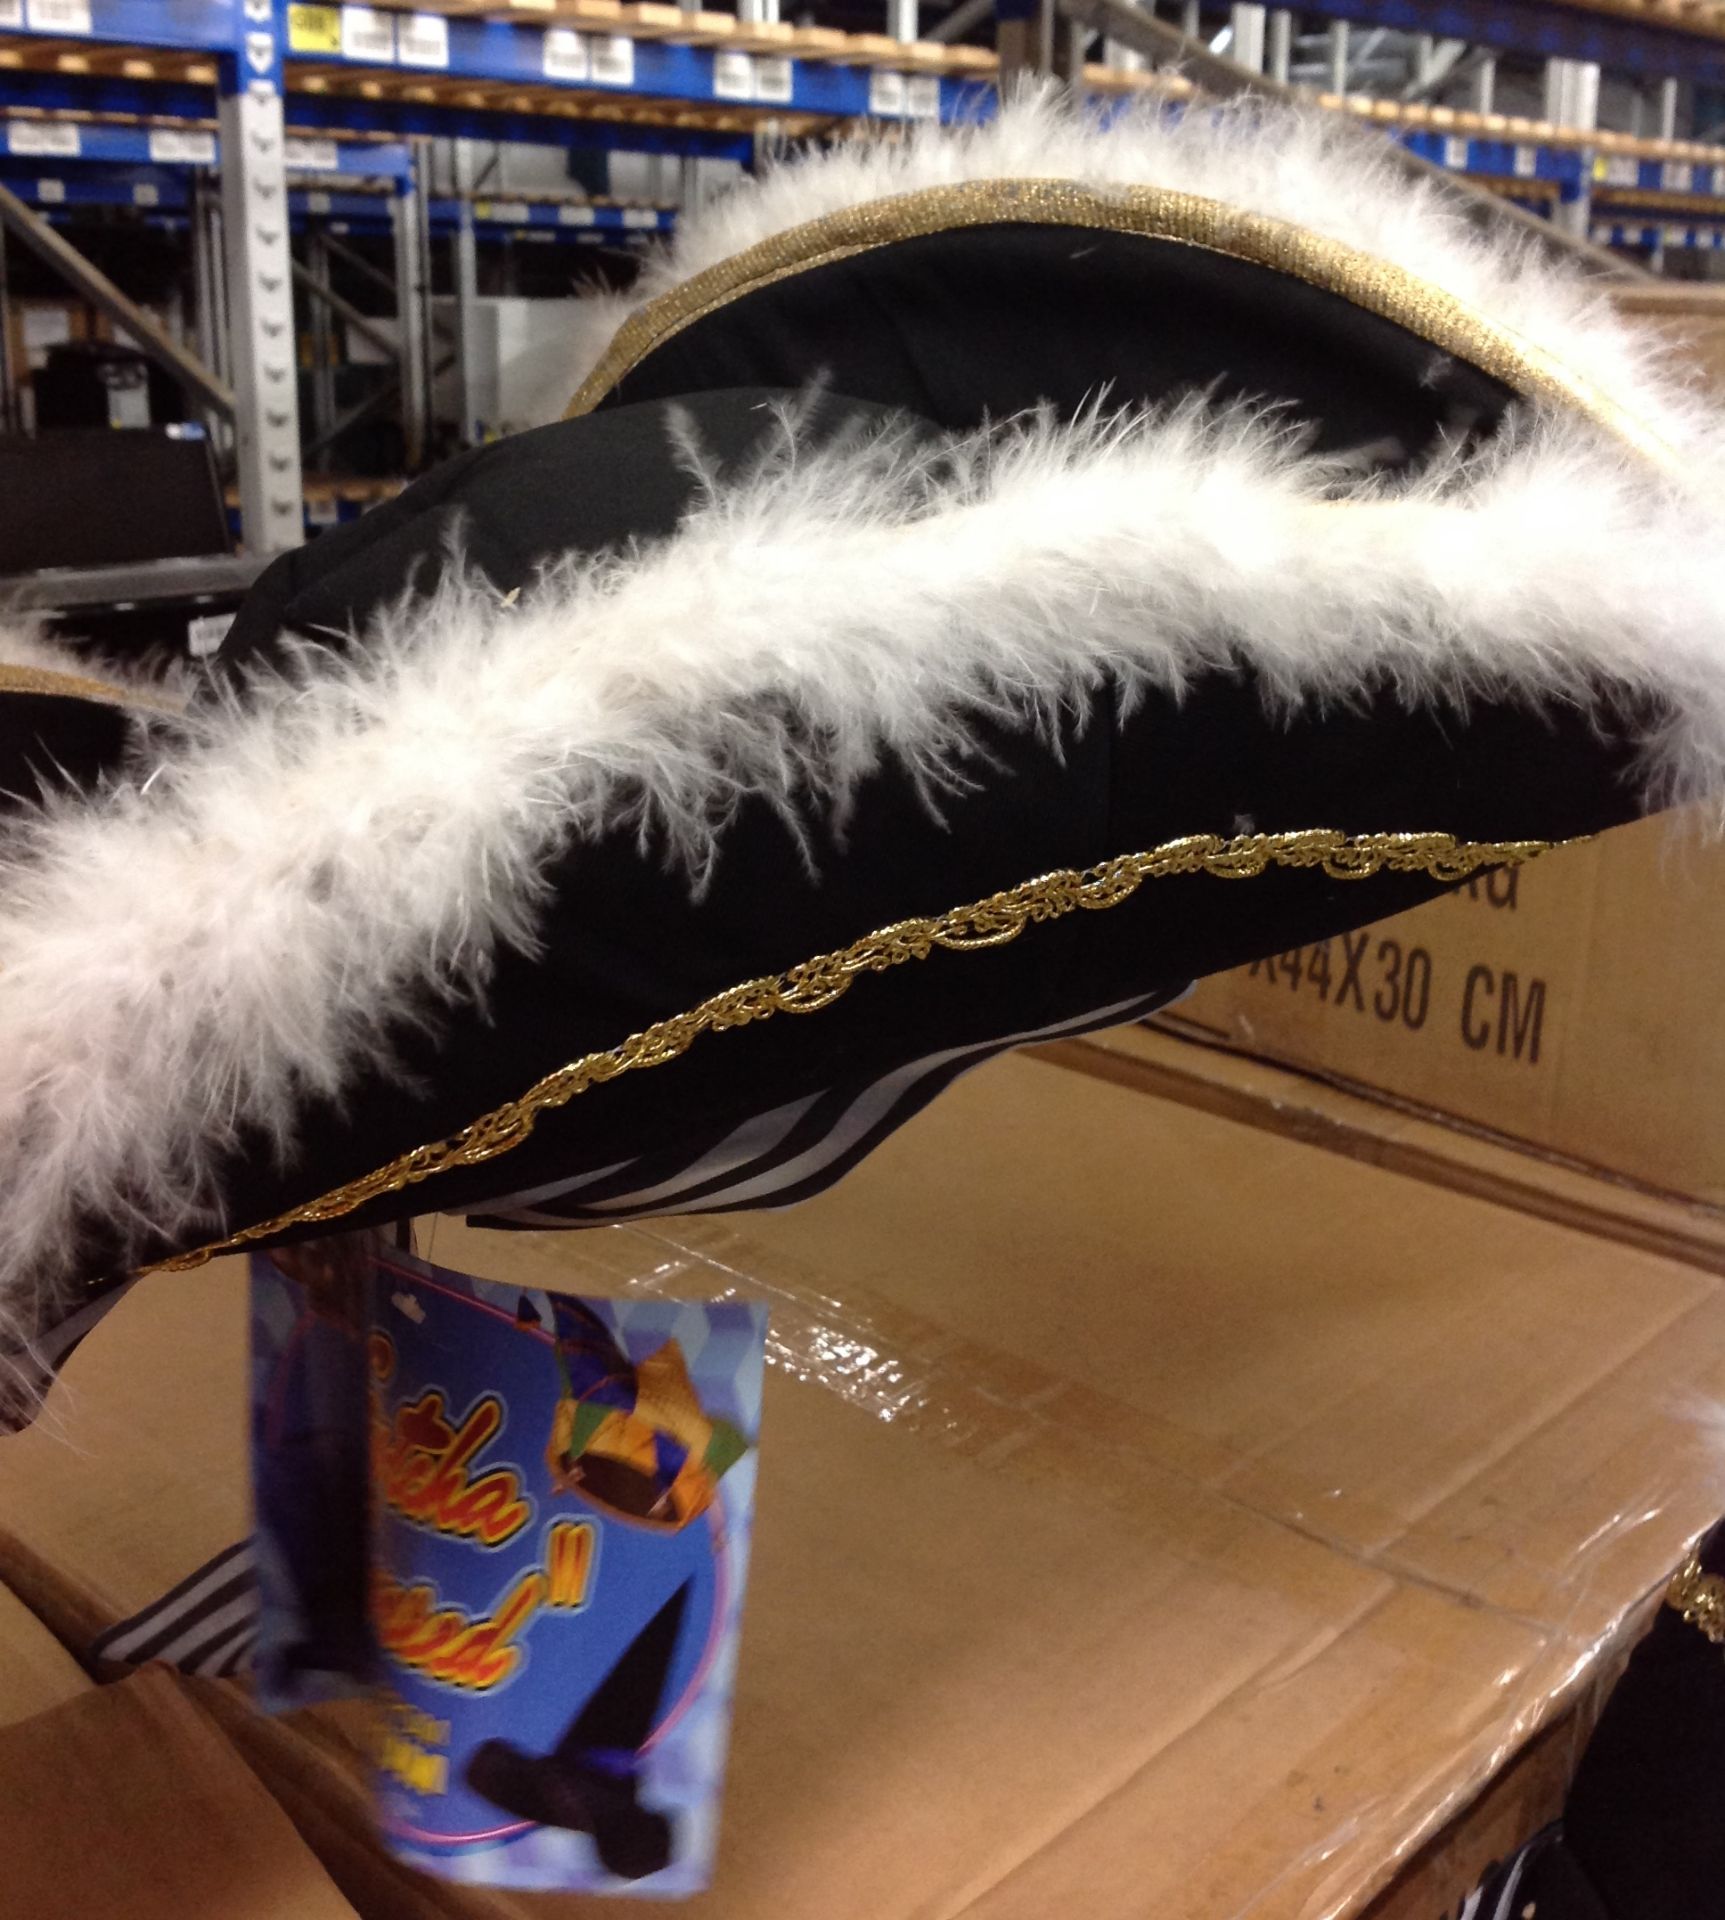 24 x Captain Cook Pirate hats by Forum - please note blue crates are not included with this lot